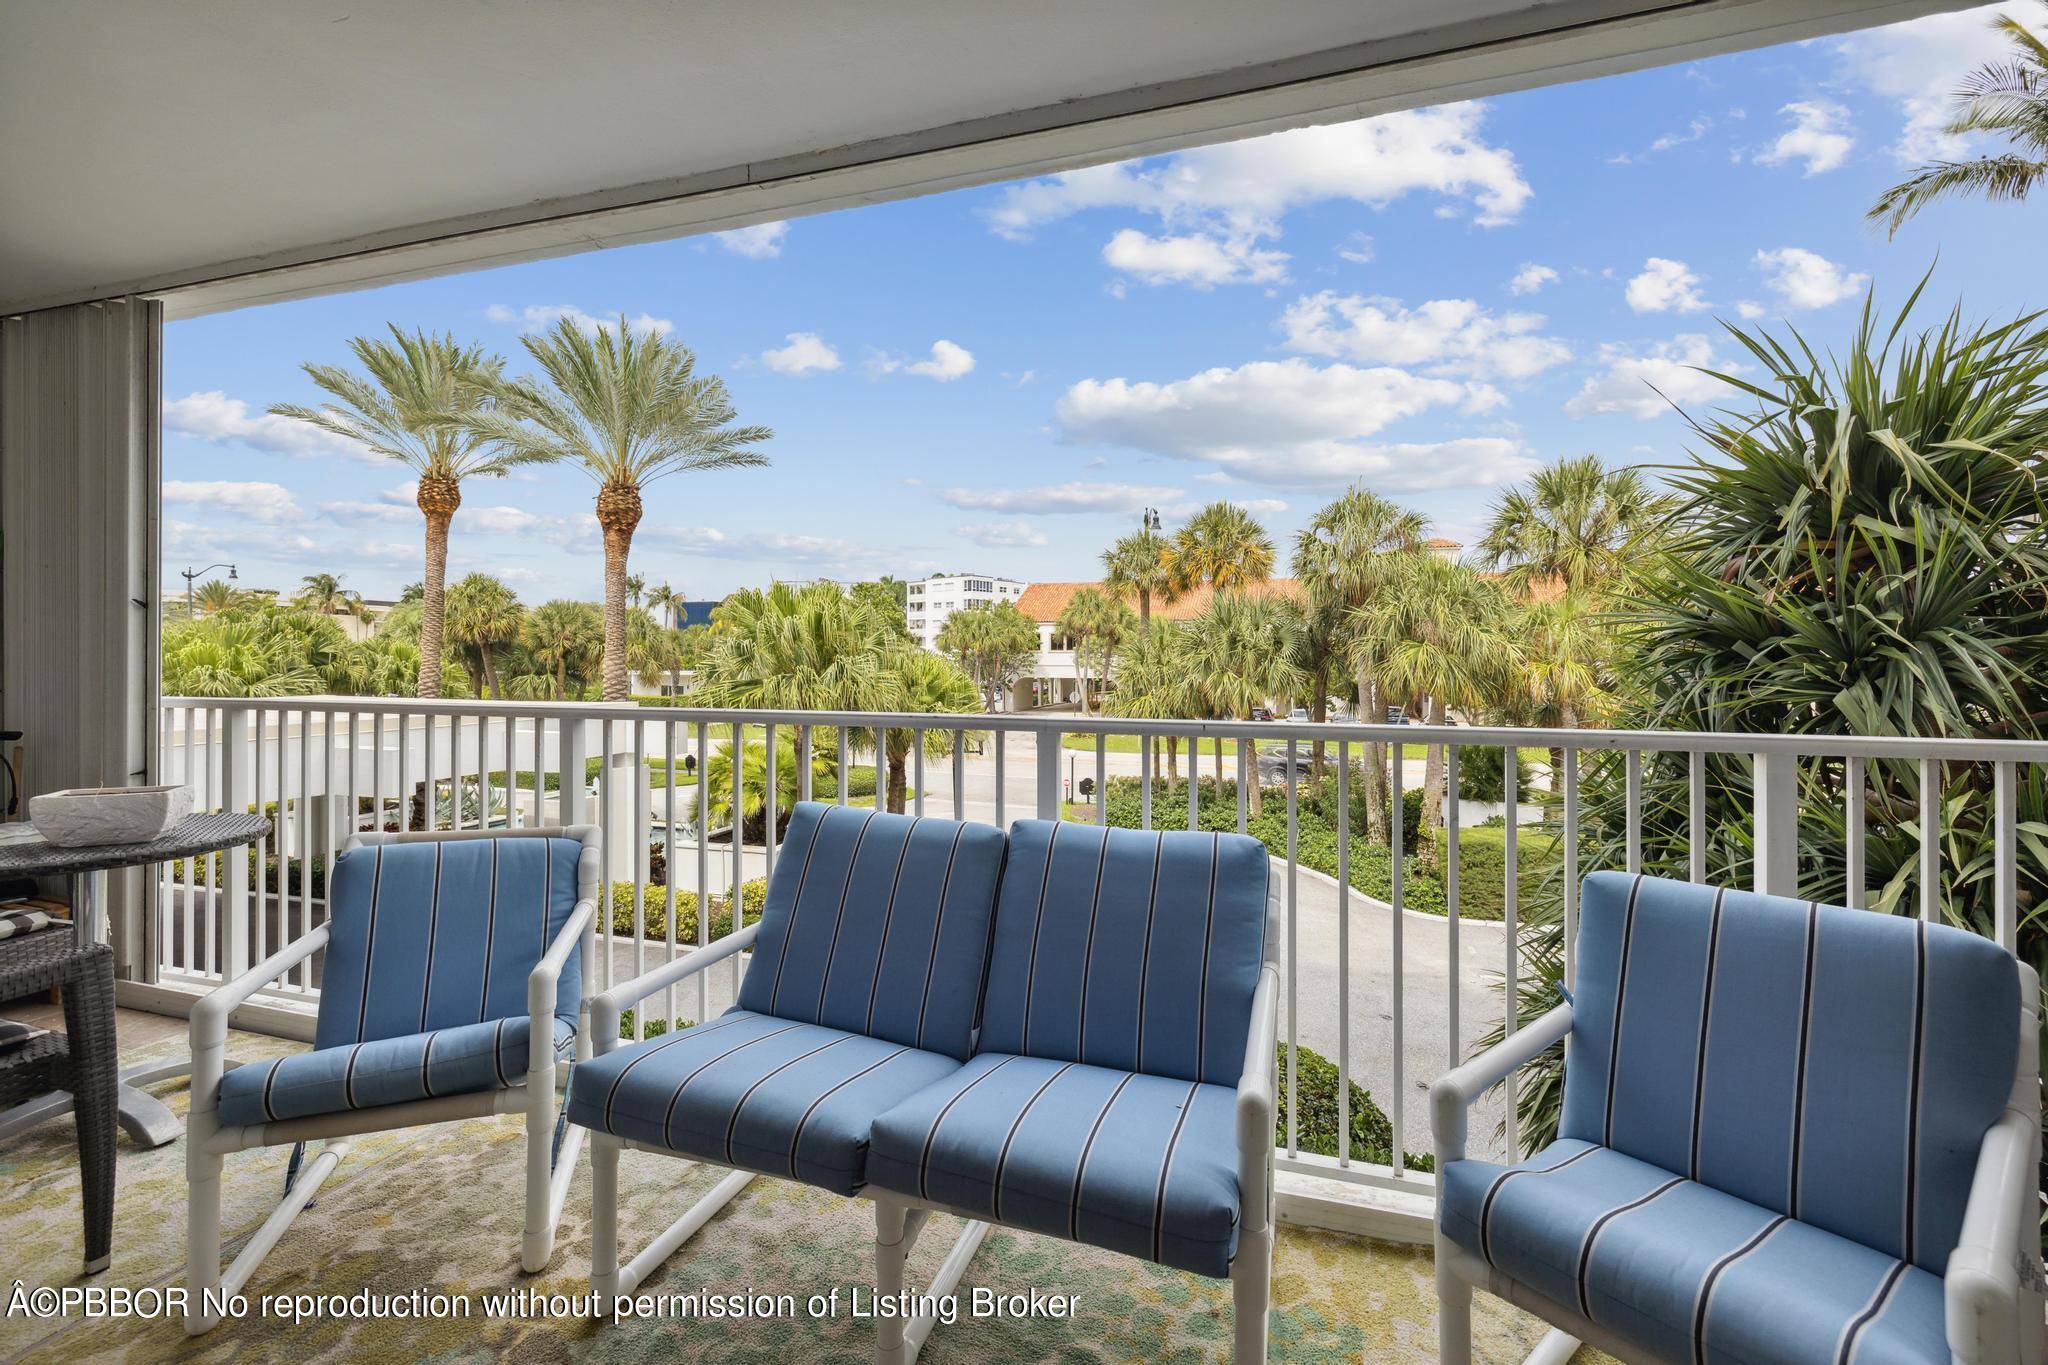 DIRECTLY ACROSS FROM DEEDED BEACH ACCESS, A rare 3 bedroom Renovated unit at one of the intracoastal's most desirable buildings.